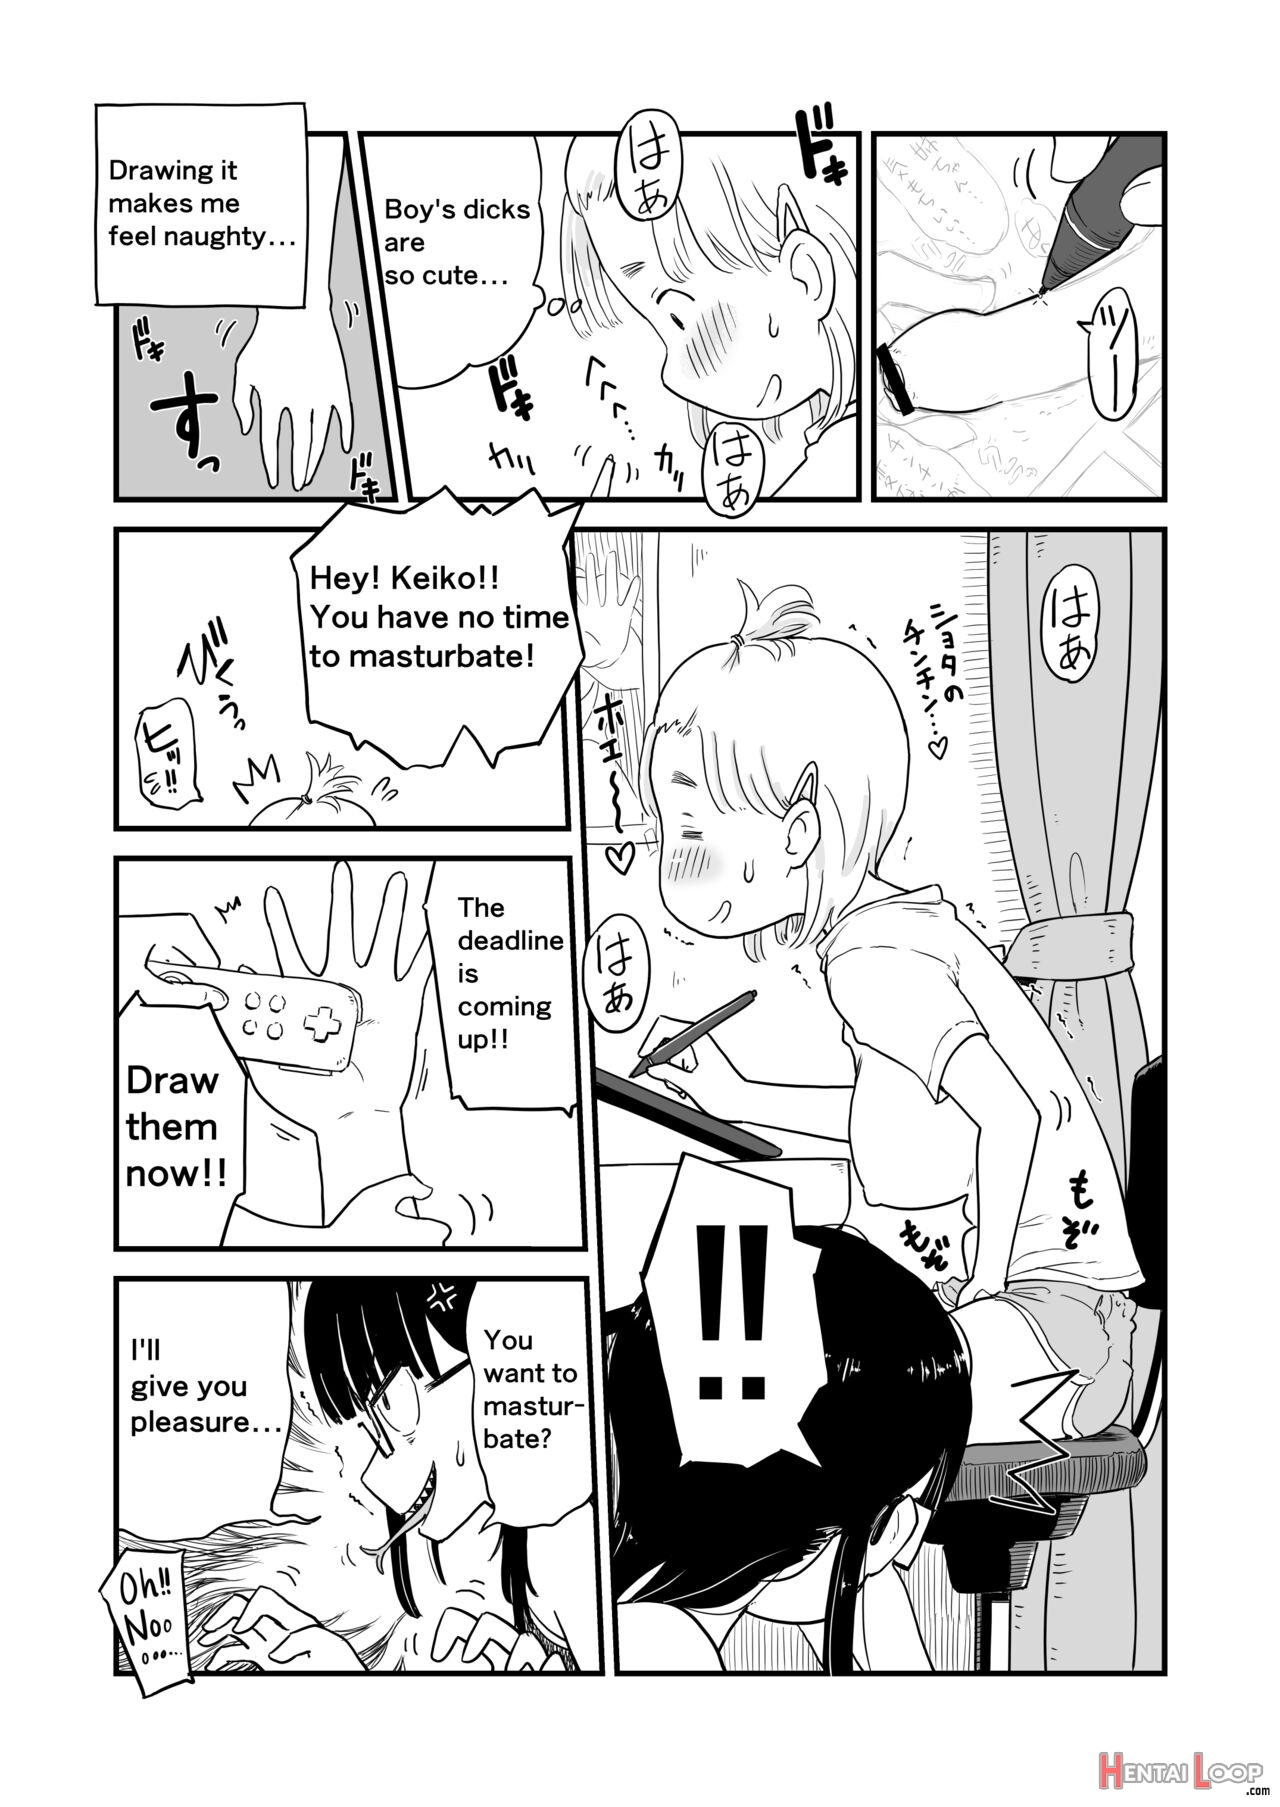 My Sister Is A Doujinshi Artist Of One-shota. page 3